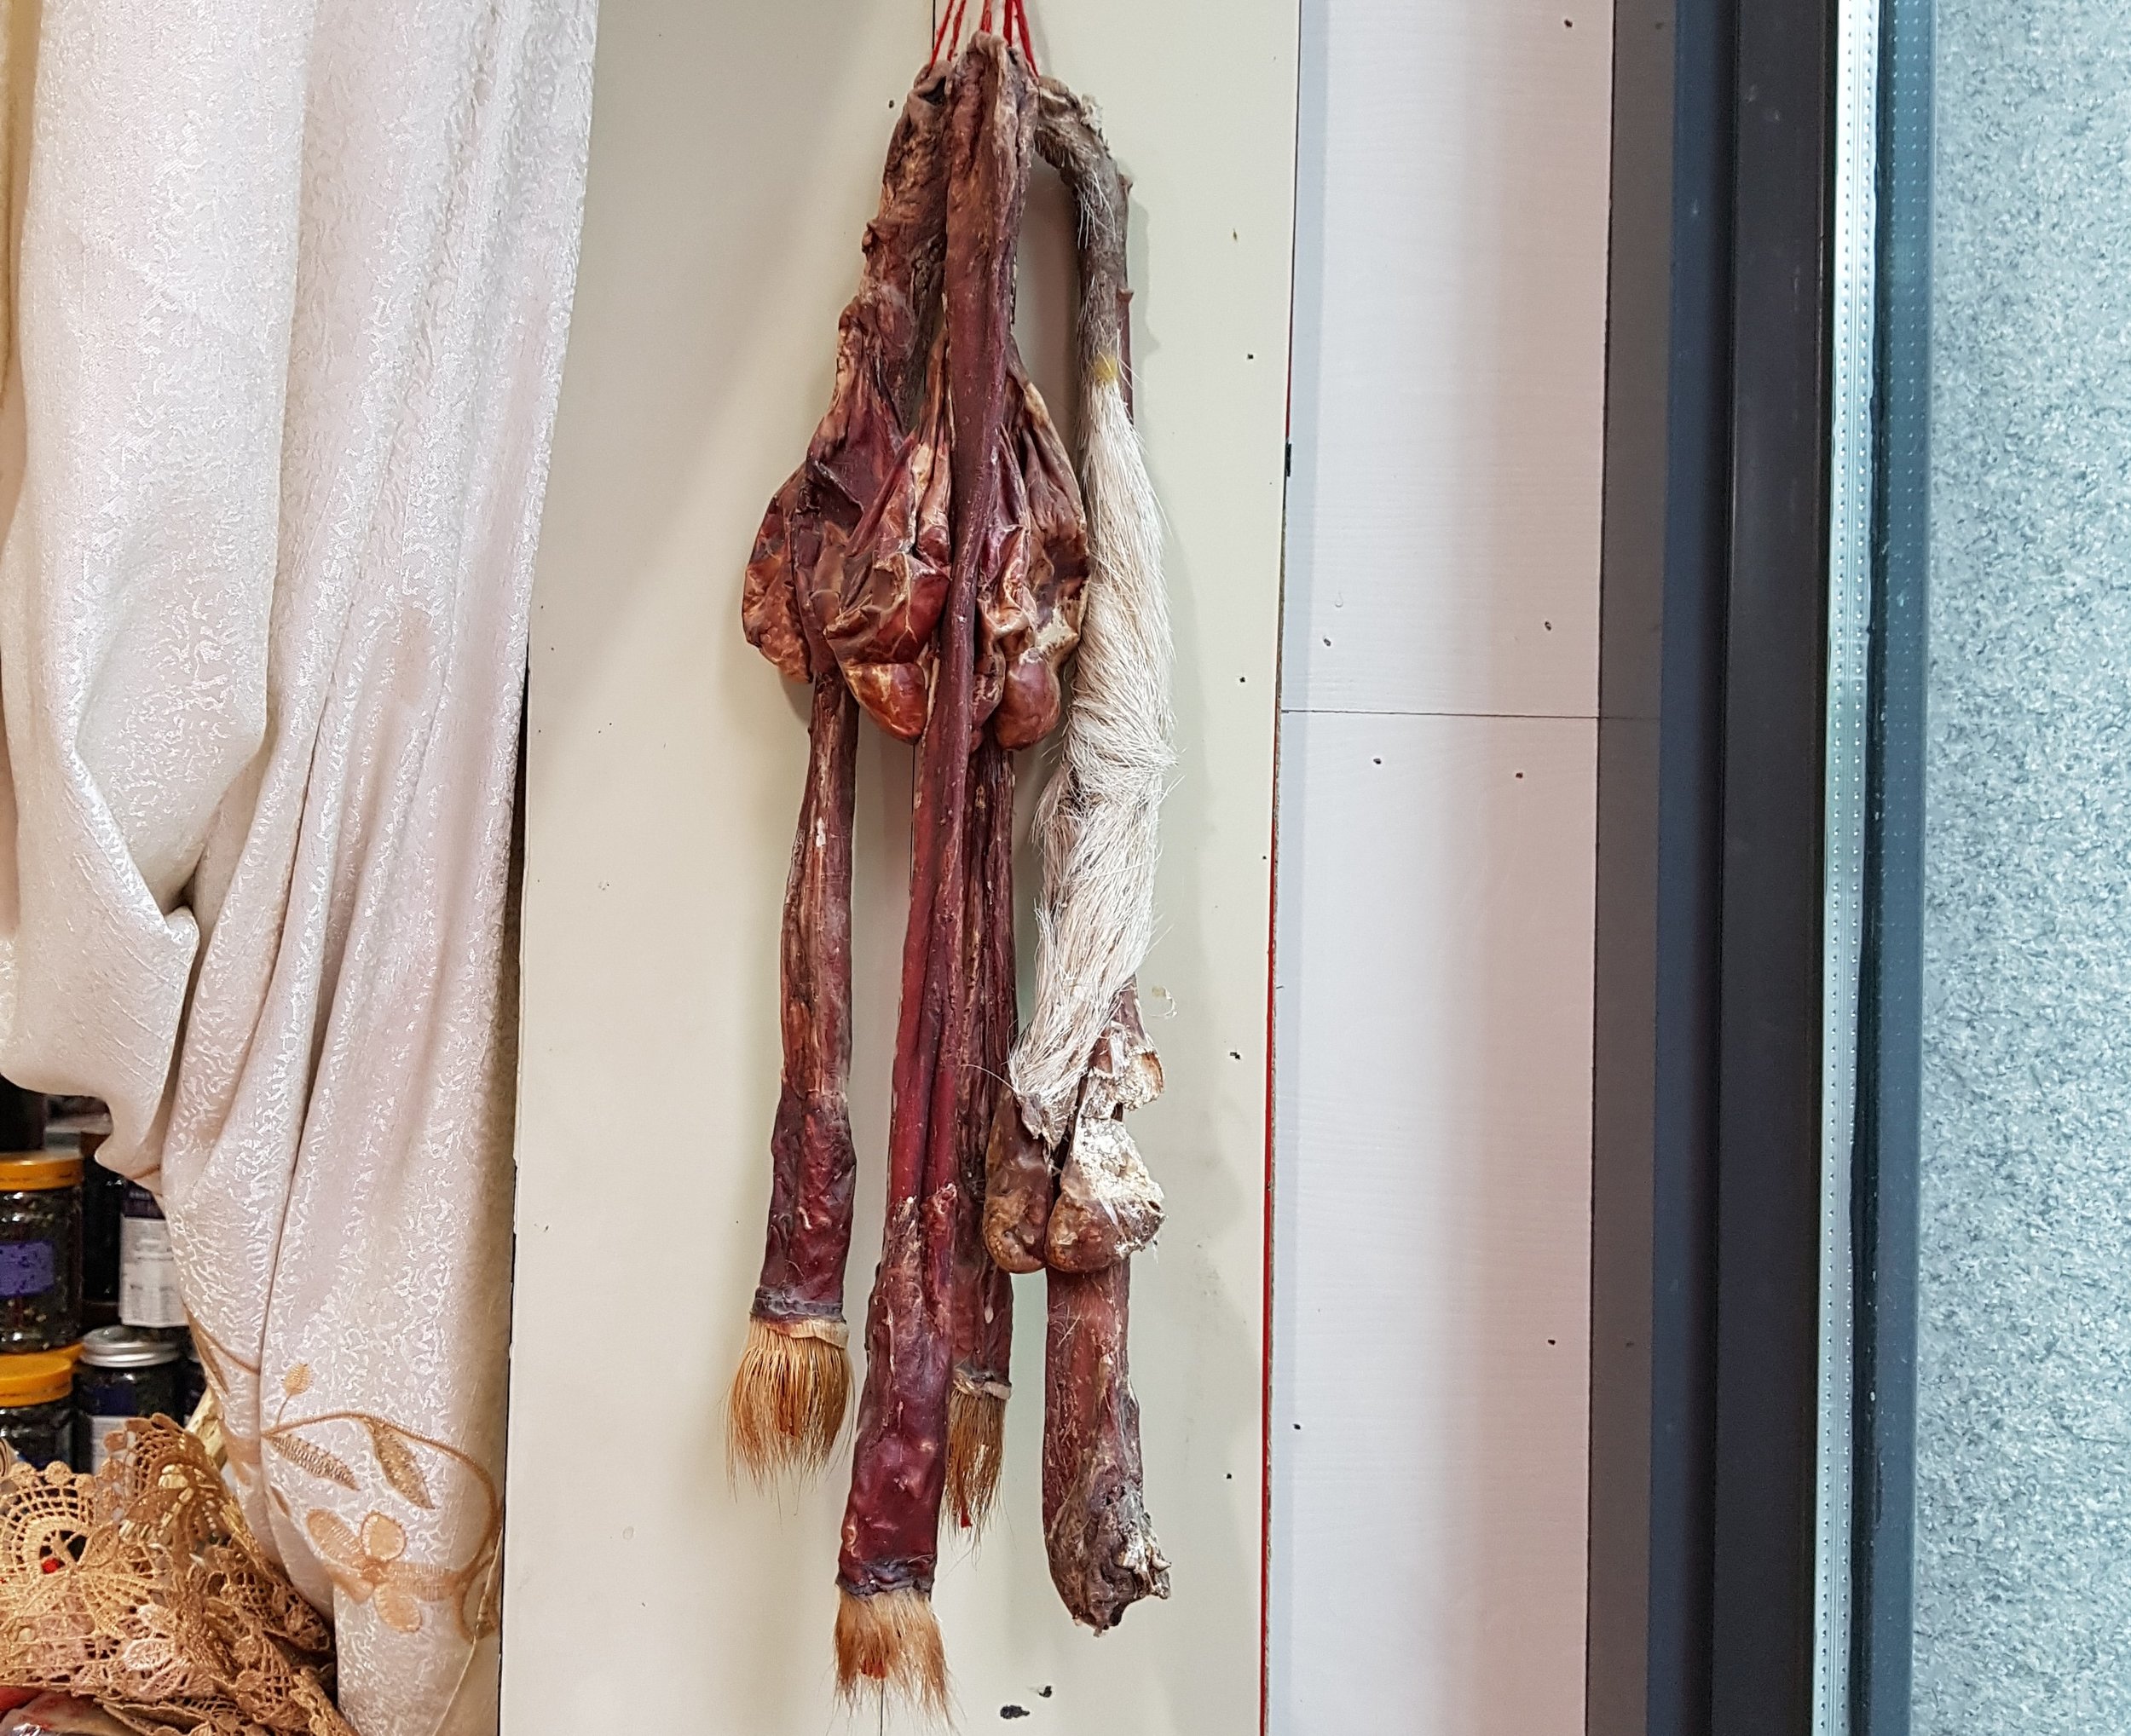 What health benefits will these dried deer penises have?